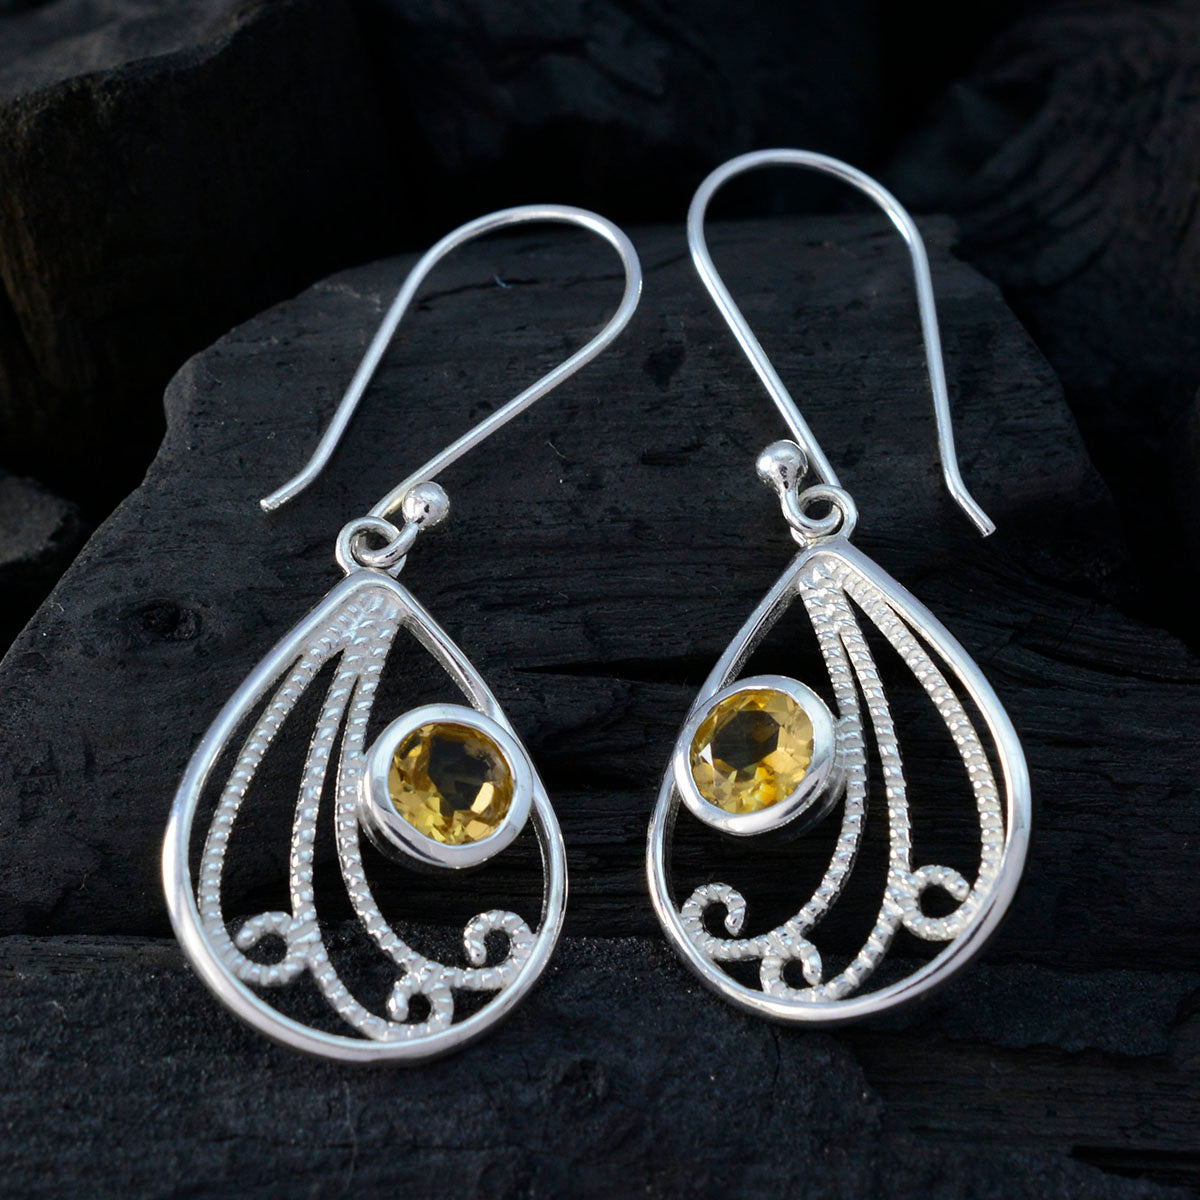 Riyo Real Gemstones round Faceted Yellow Citrine Silver Earrings gift for black Friday